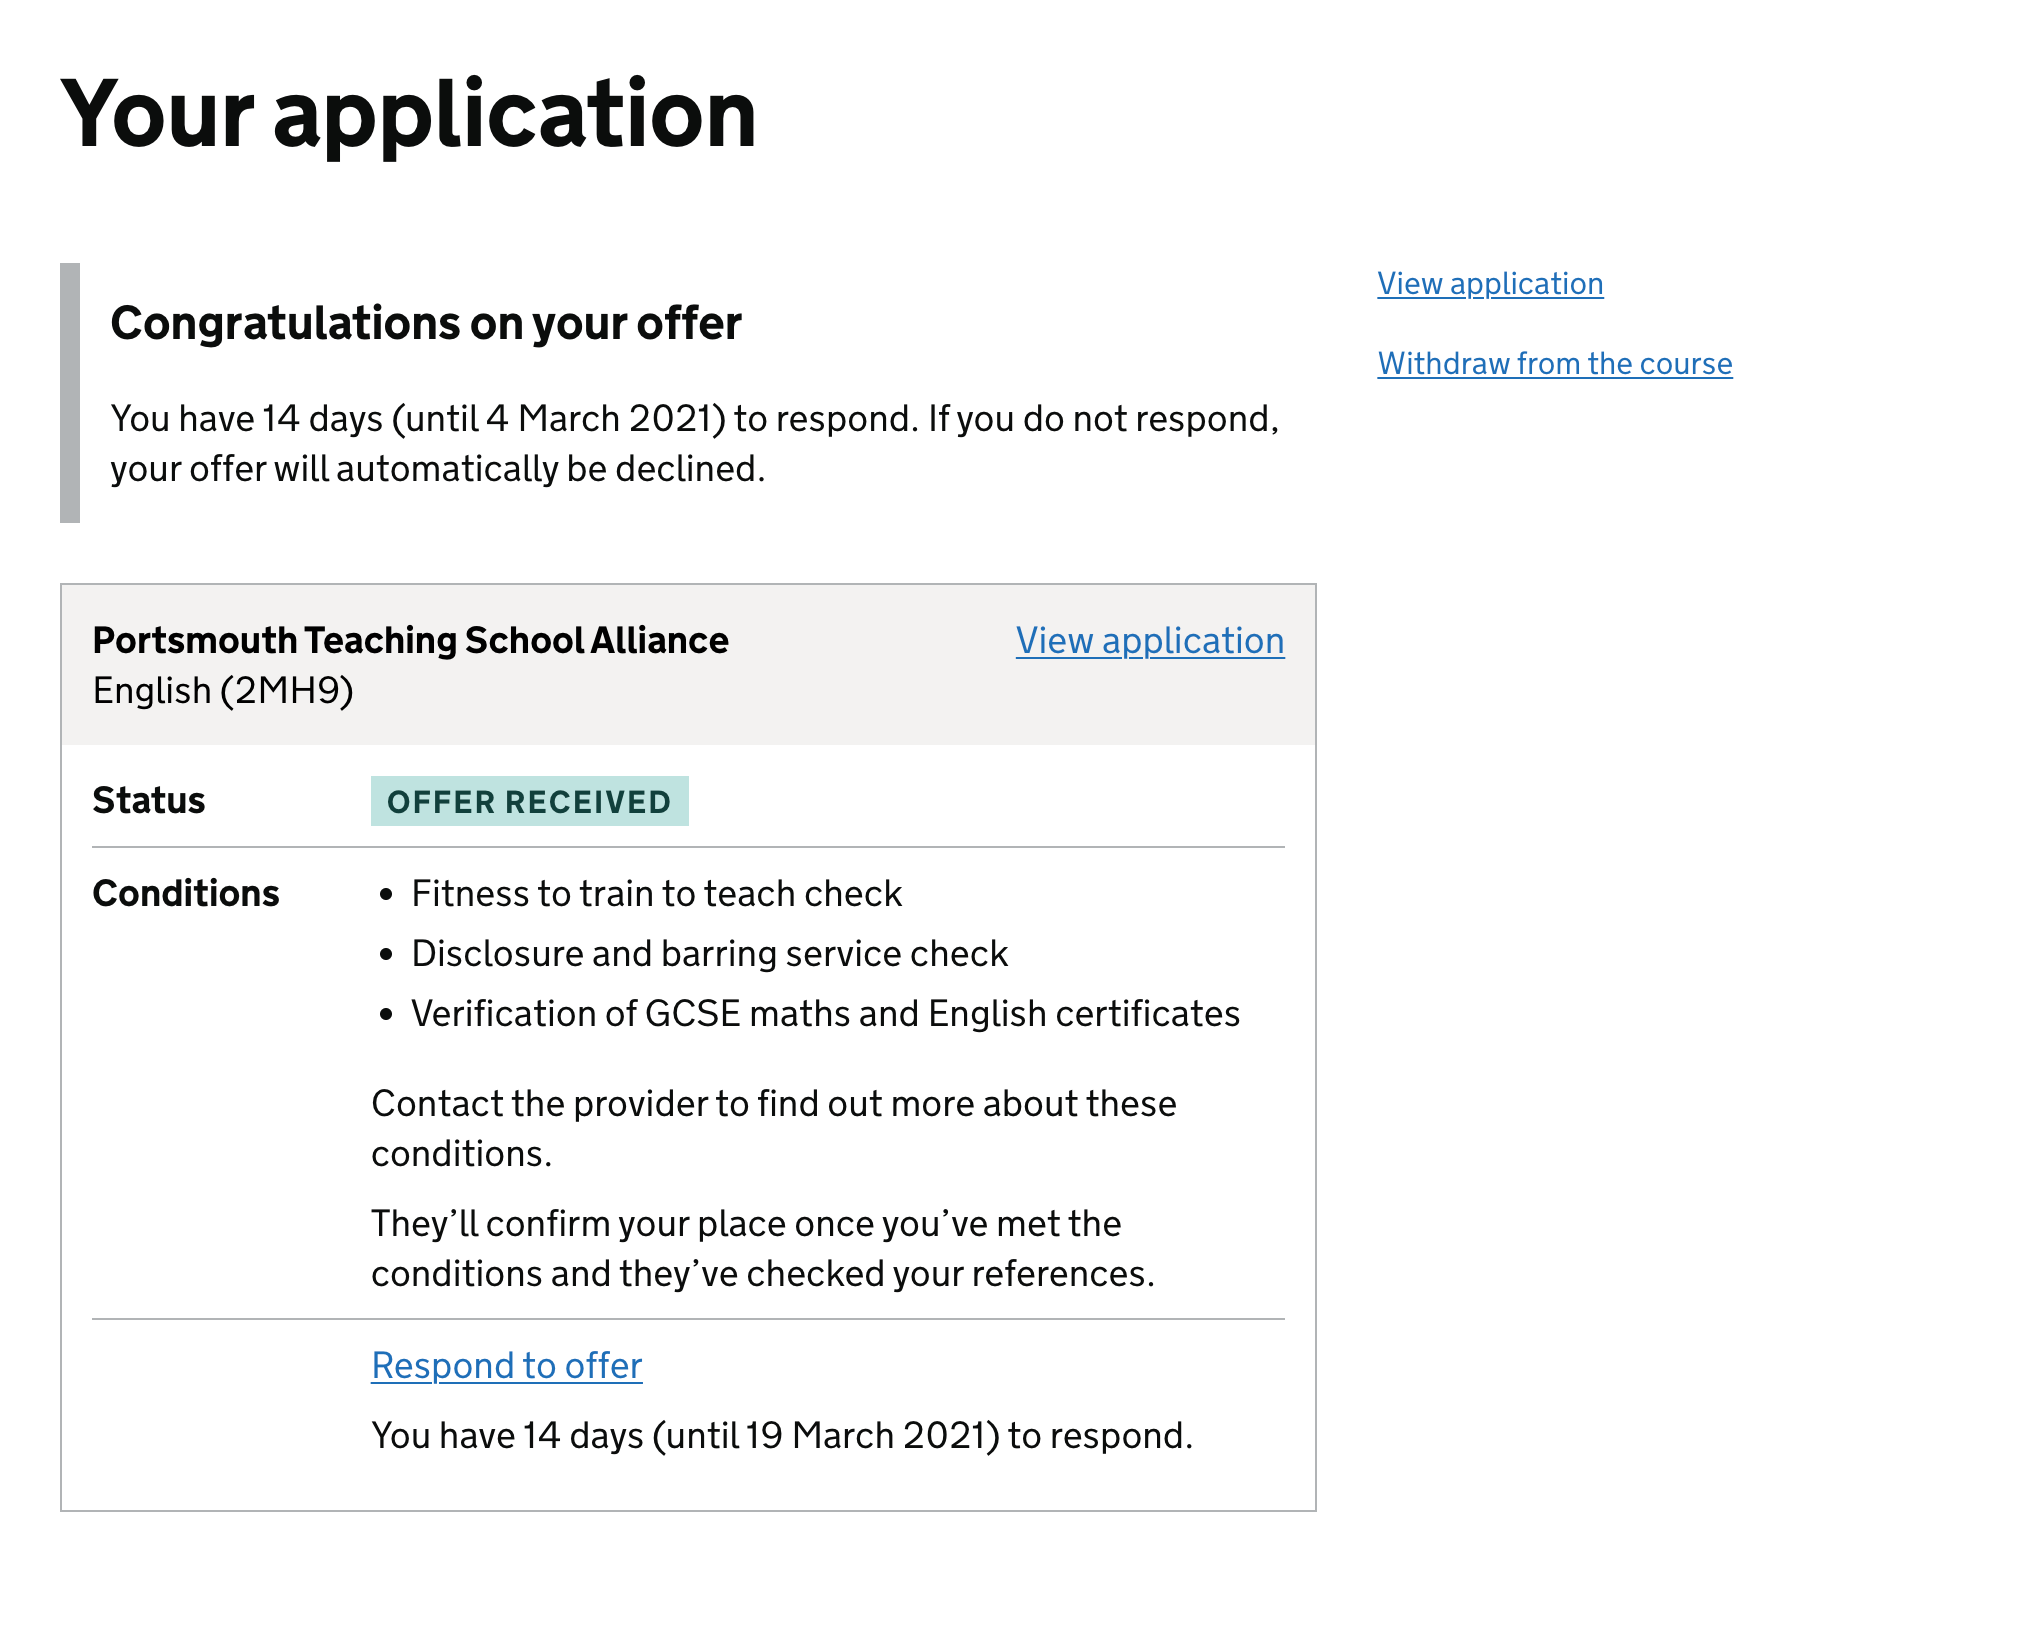 Screenshot showing page with the heading ‘Your application‘. The introduction shows the heading ‘Congratulations on your offer‘ and the content ‘You have 14 days (until 4 Matrch 2021) to respond. If you do not respond, your offer will automatically be declined.’ A box contains details of the offer, including the name of the training provider, the course, the ‘offer received‘ status and the conditions of the offer. These conditions include ‘Fitness to train to teach check‘, ‘Disclosure and barring service check’ and ‘Verification of GCSE maths and English certificates‘. Text under this tells the candidate to contact the provider for more information and mentions that the provider needs to check their references. A link underneath lets the candidate respond to the offer and repeats the deadline. Links outside the box on the right of the page let the candidate view their application or withdraw from the course.